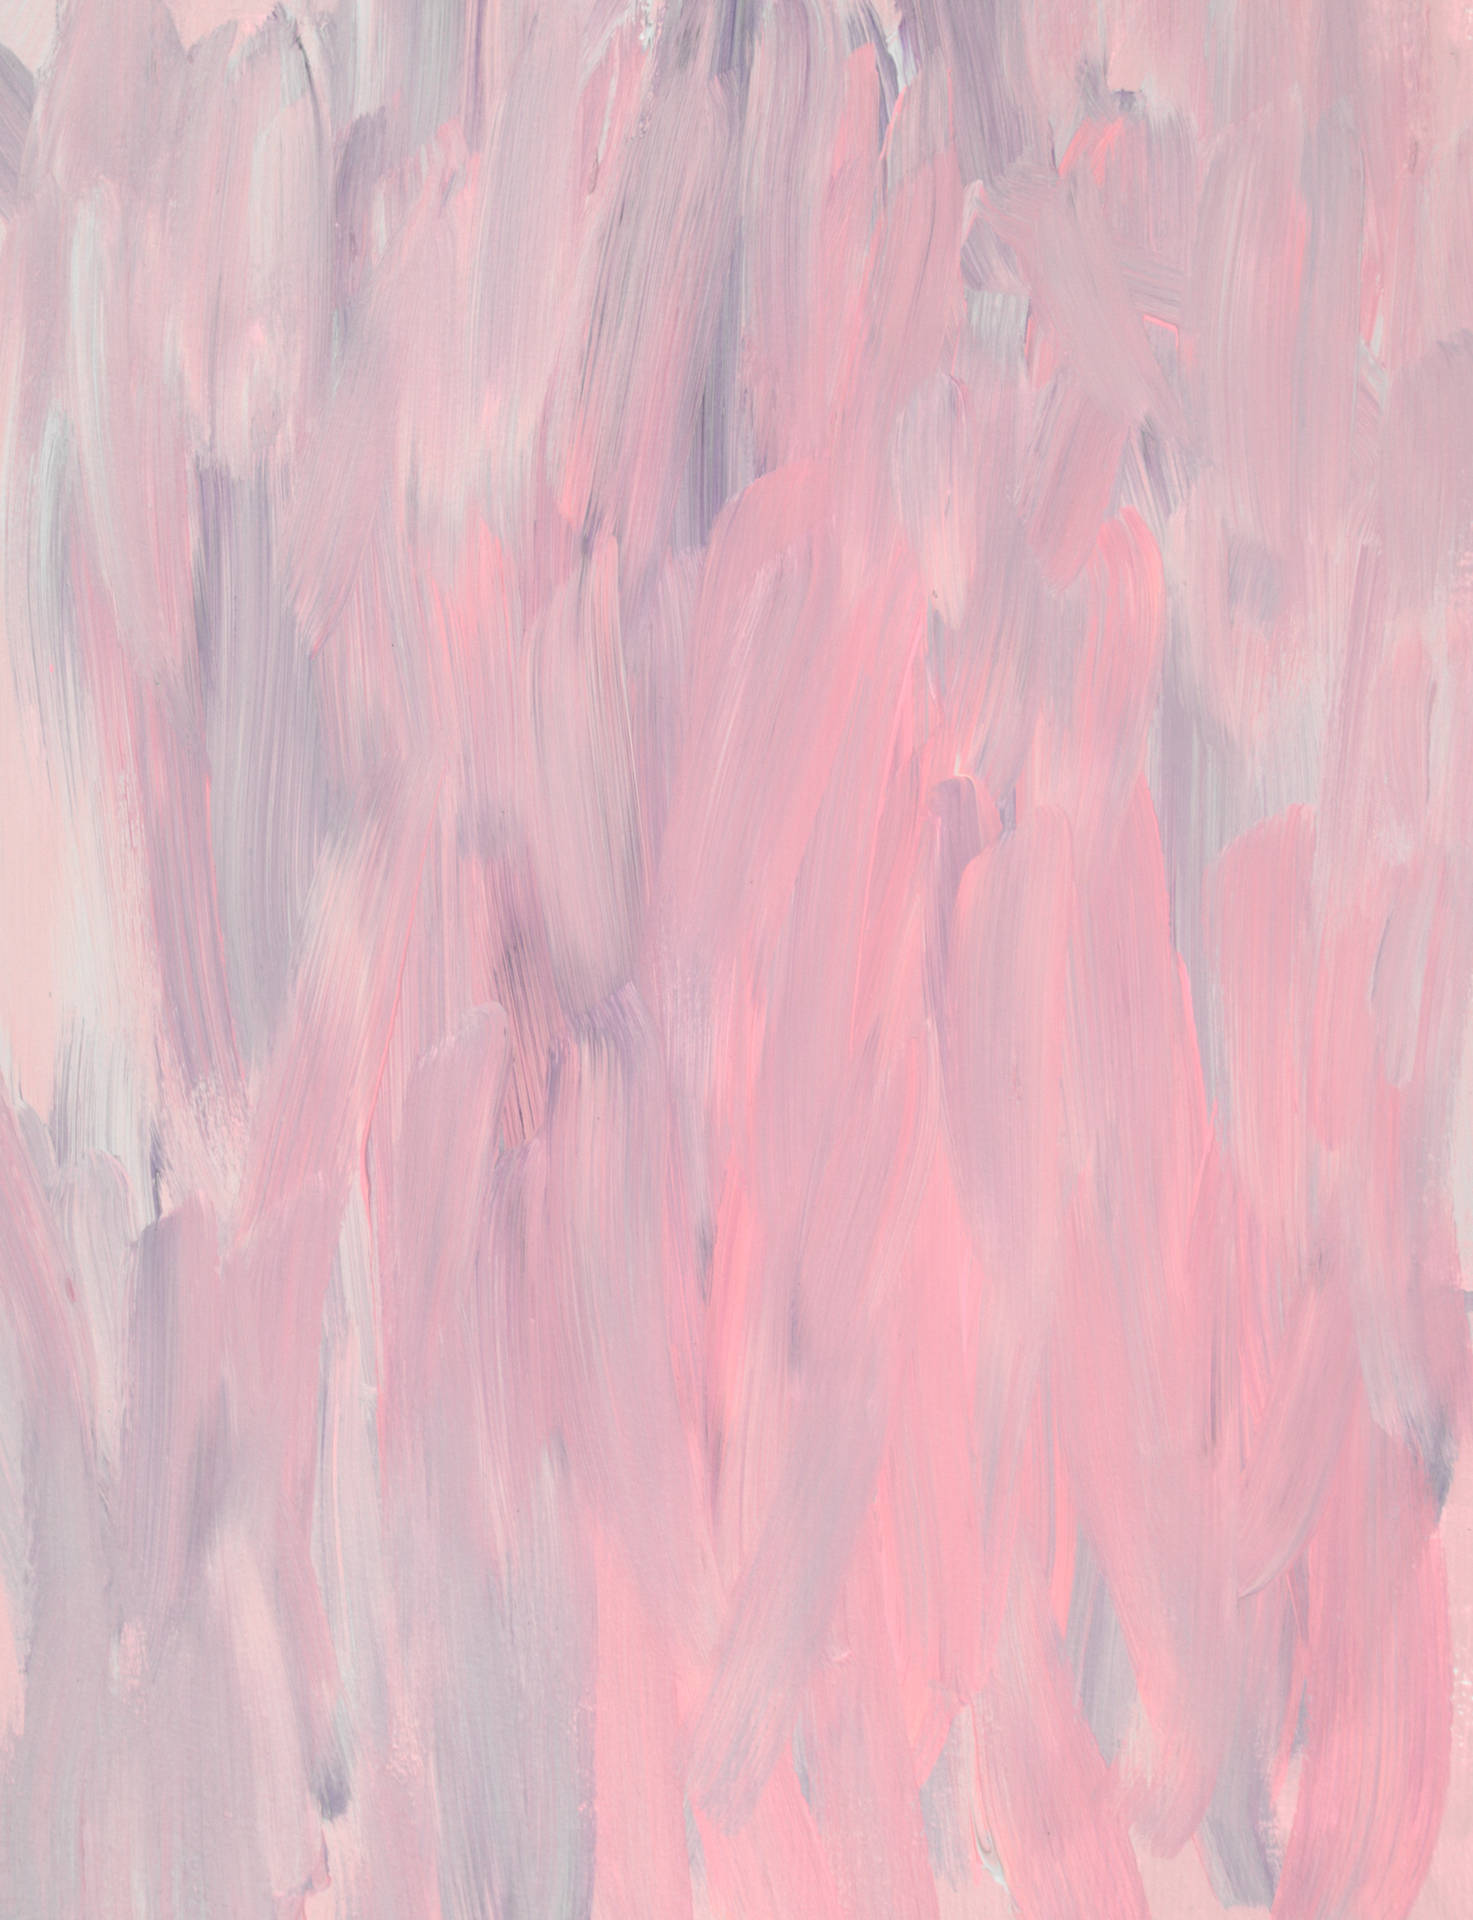 Pink And White Cute Pastel Aesthetic Painting Background